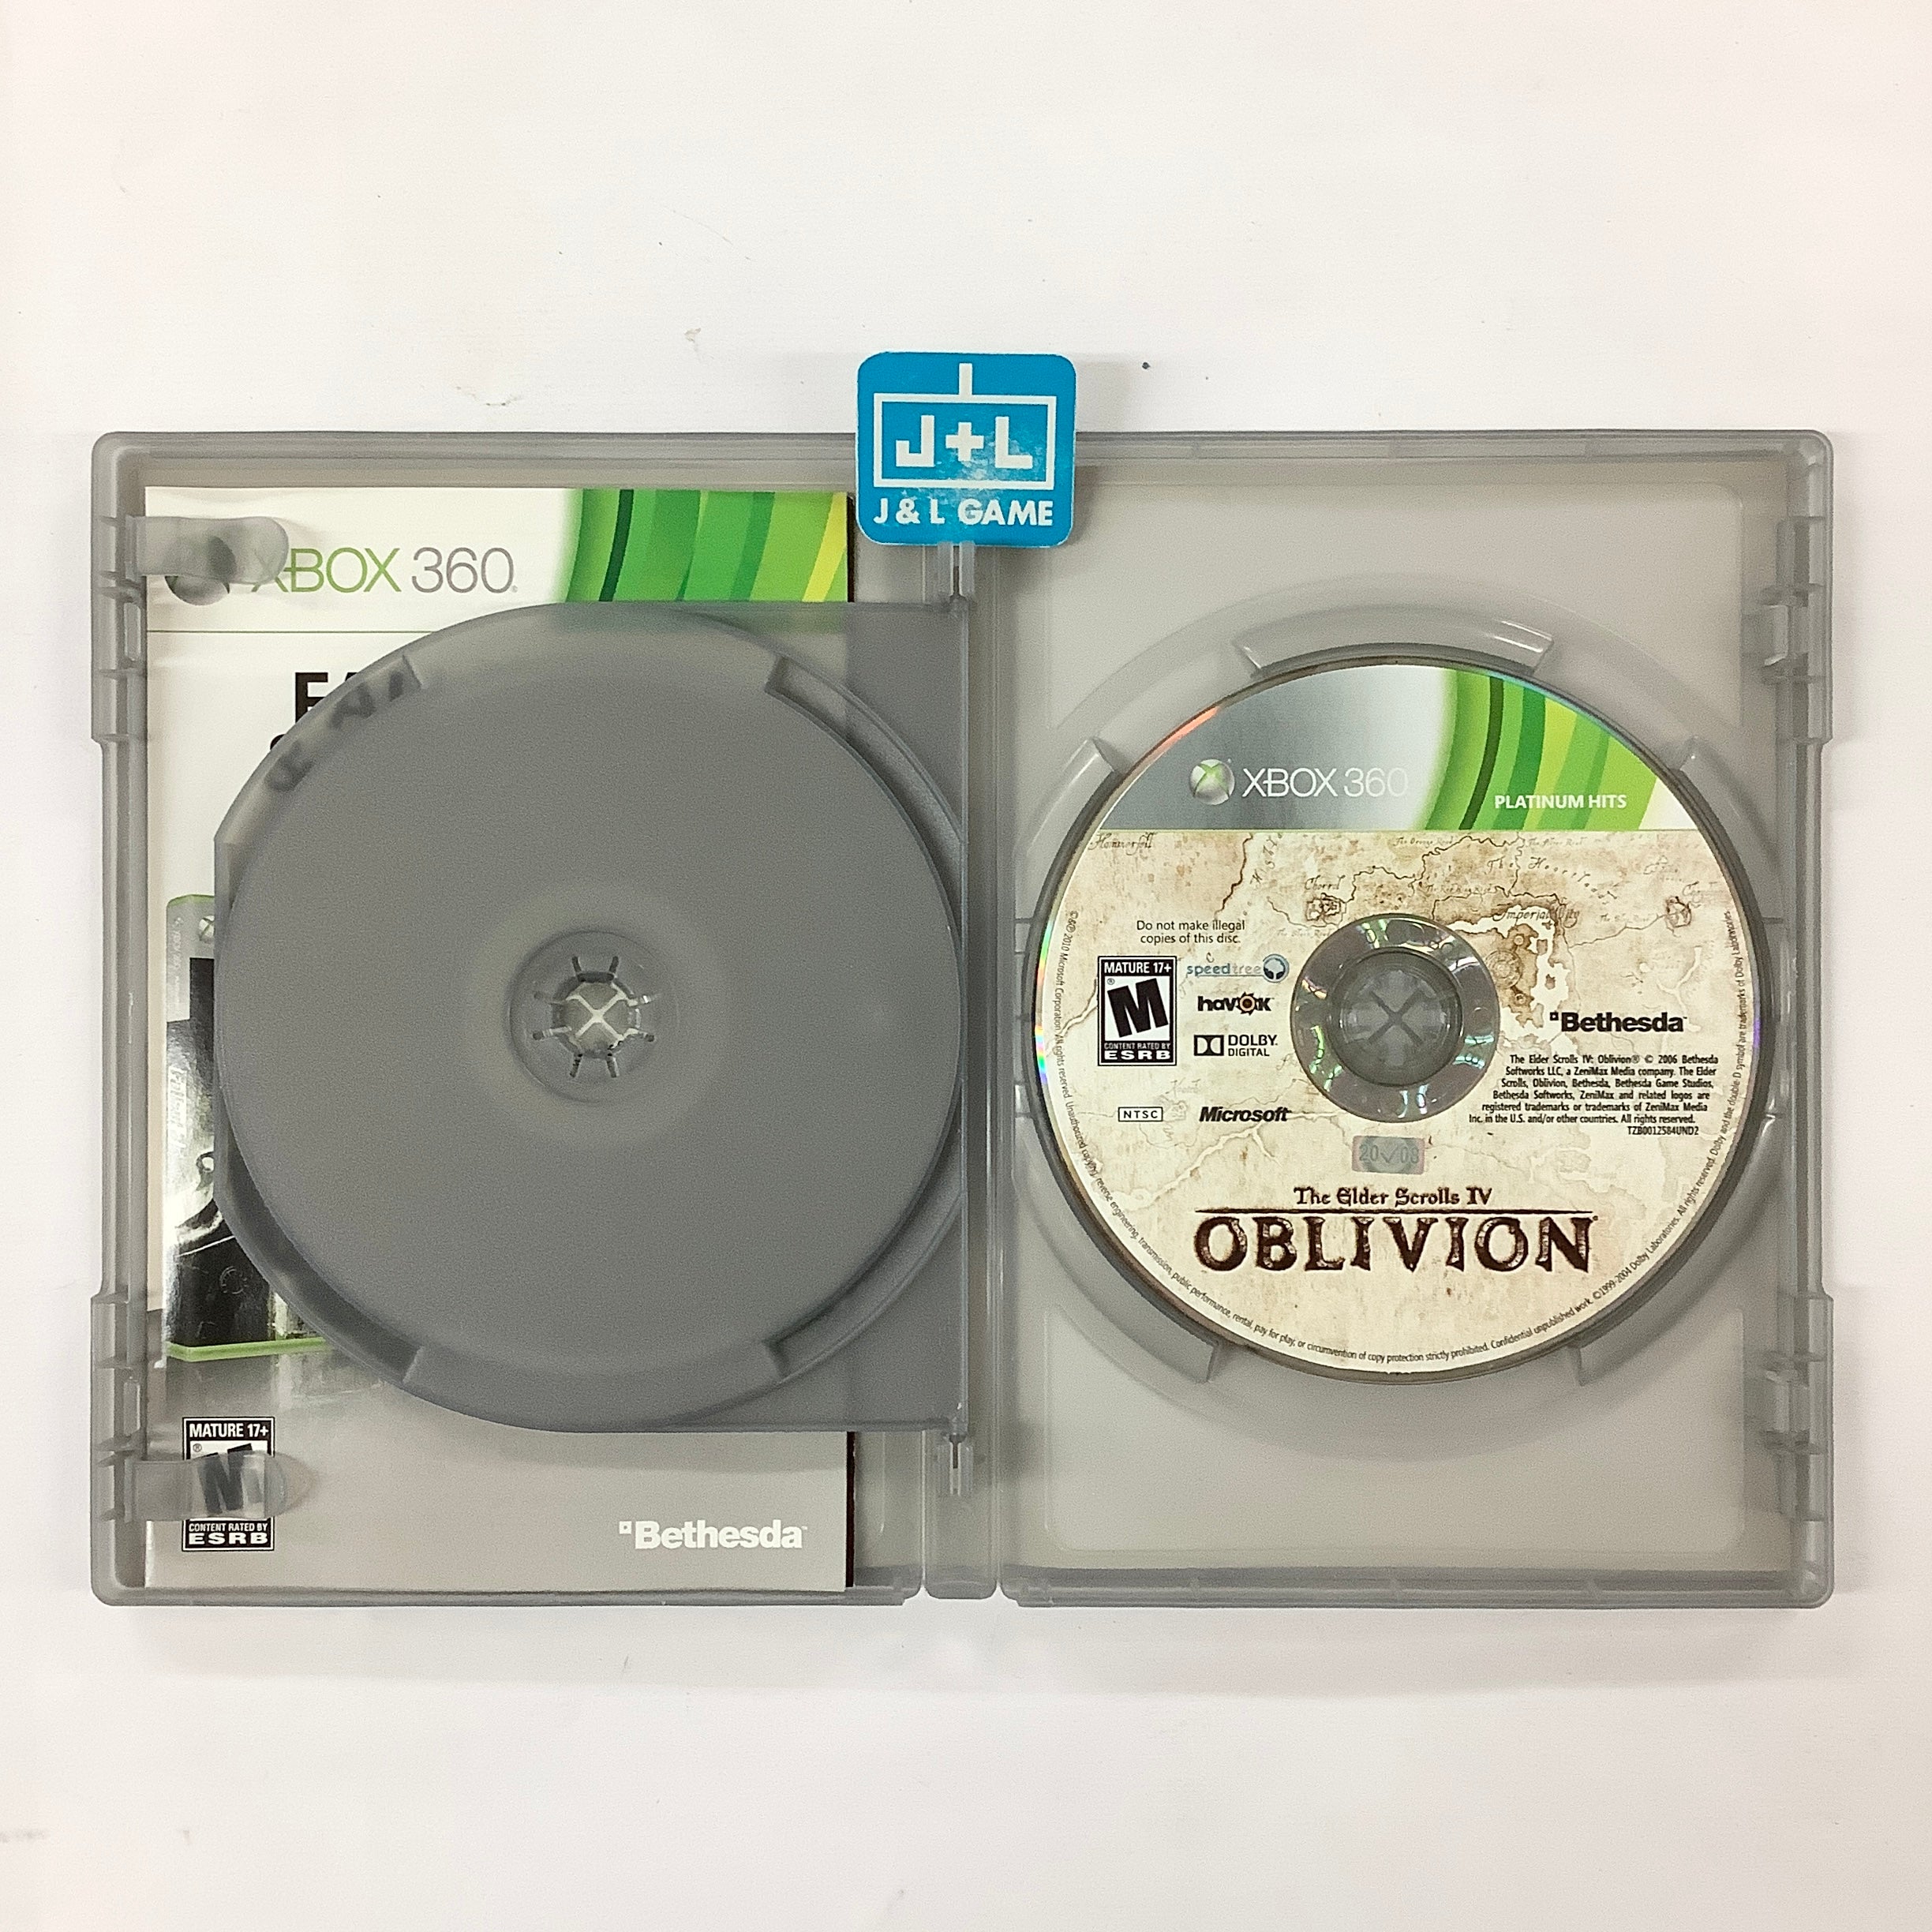 Fallout 3 u0026 Oblivion Double Pack (Platinum Hits) - Xbox 360 [Pre-Owned]